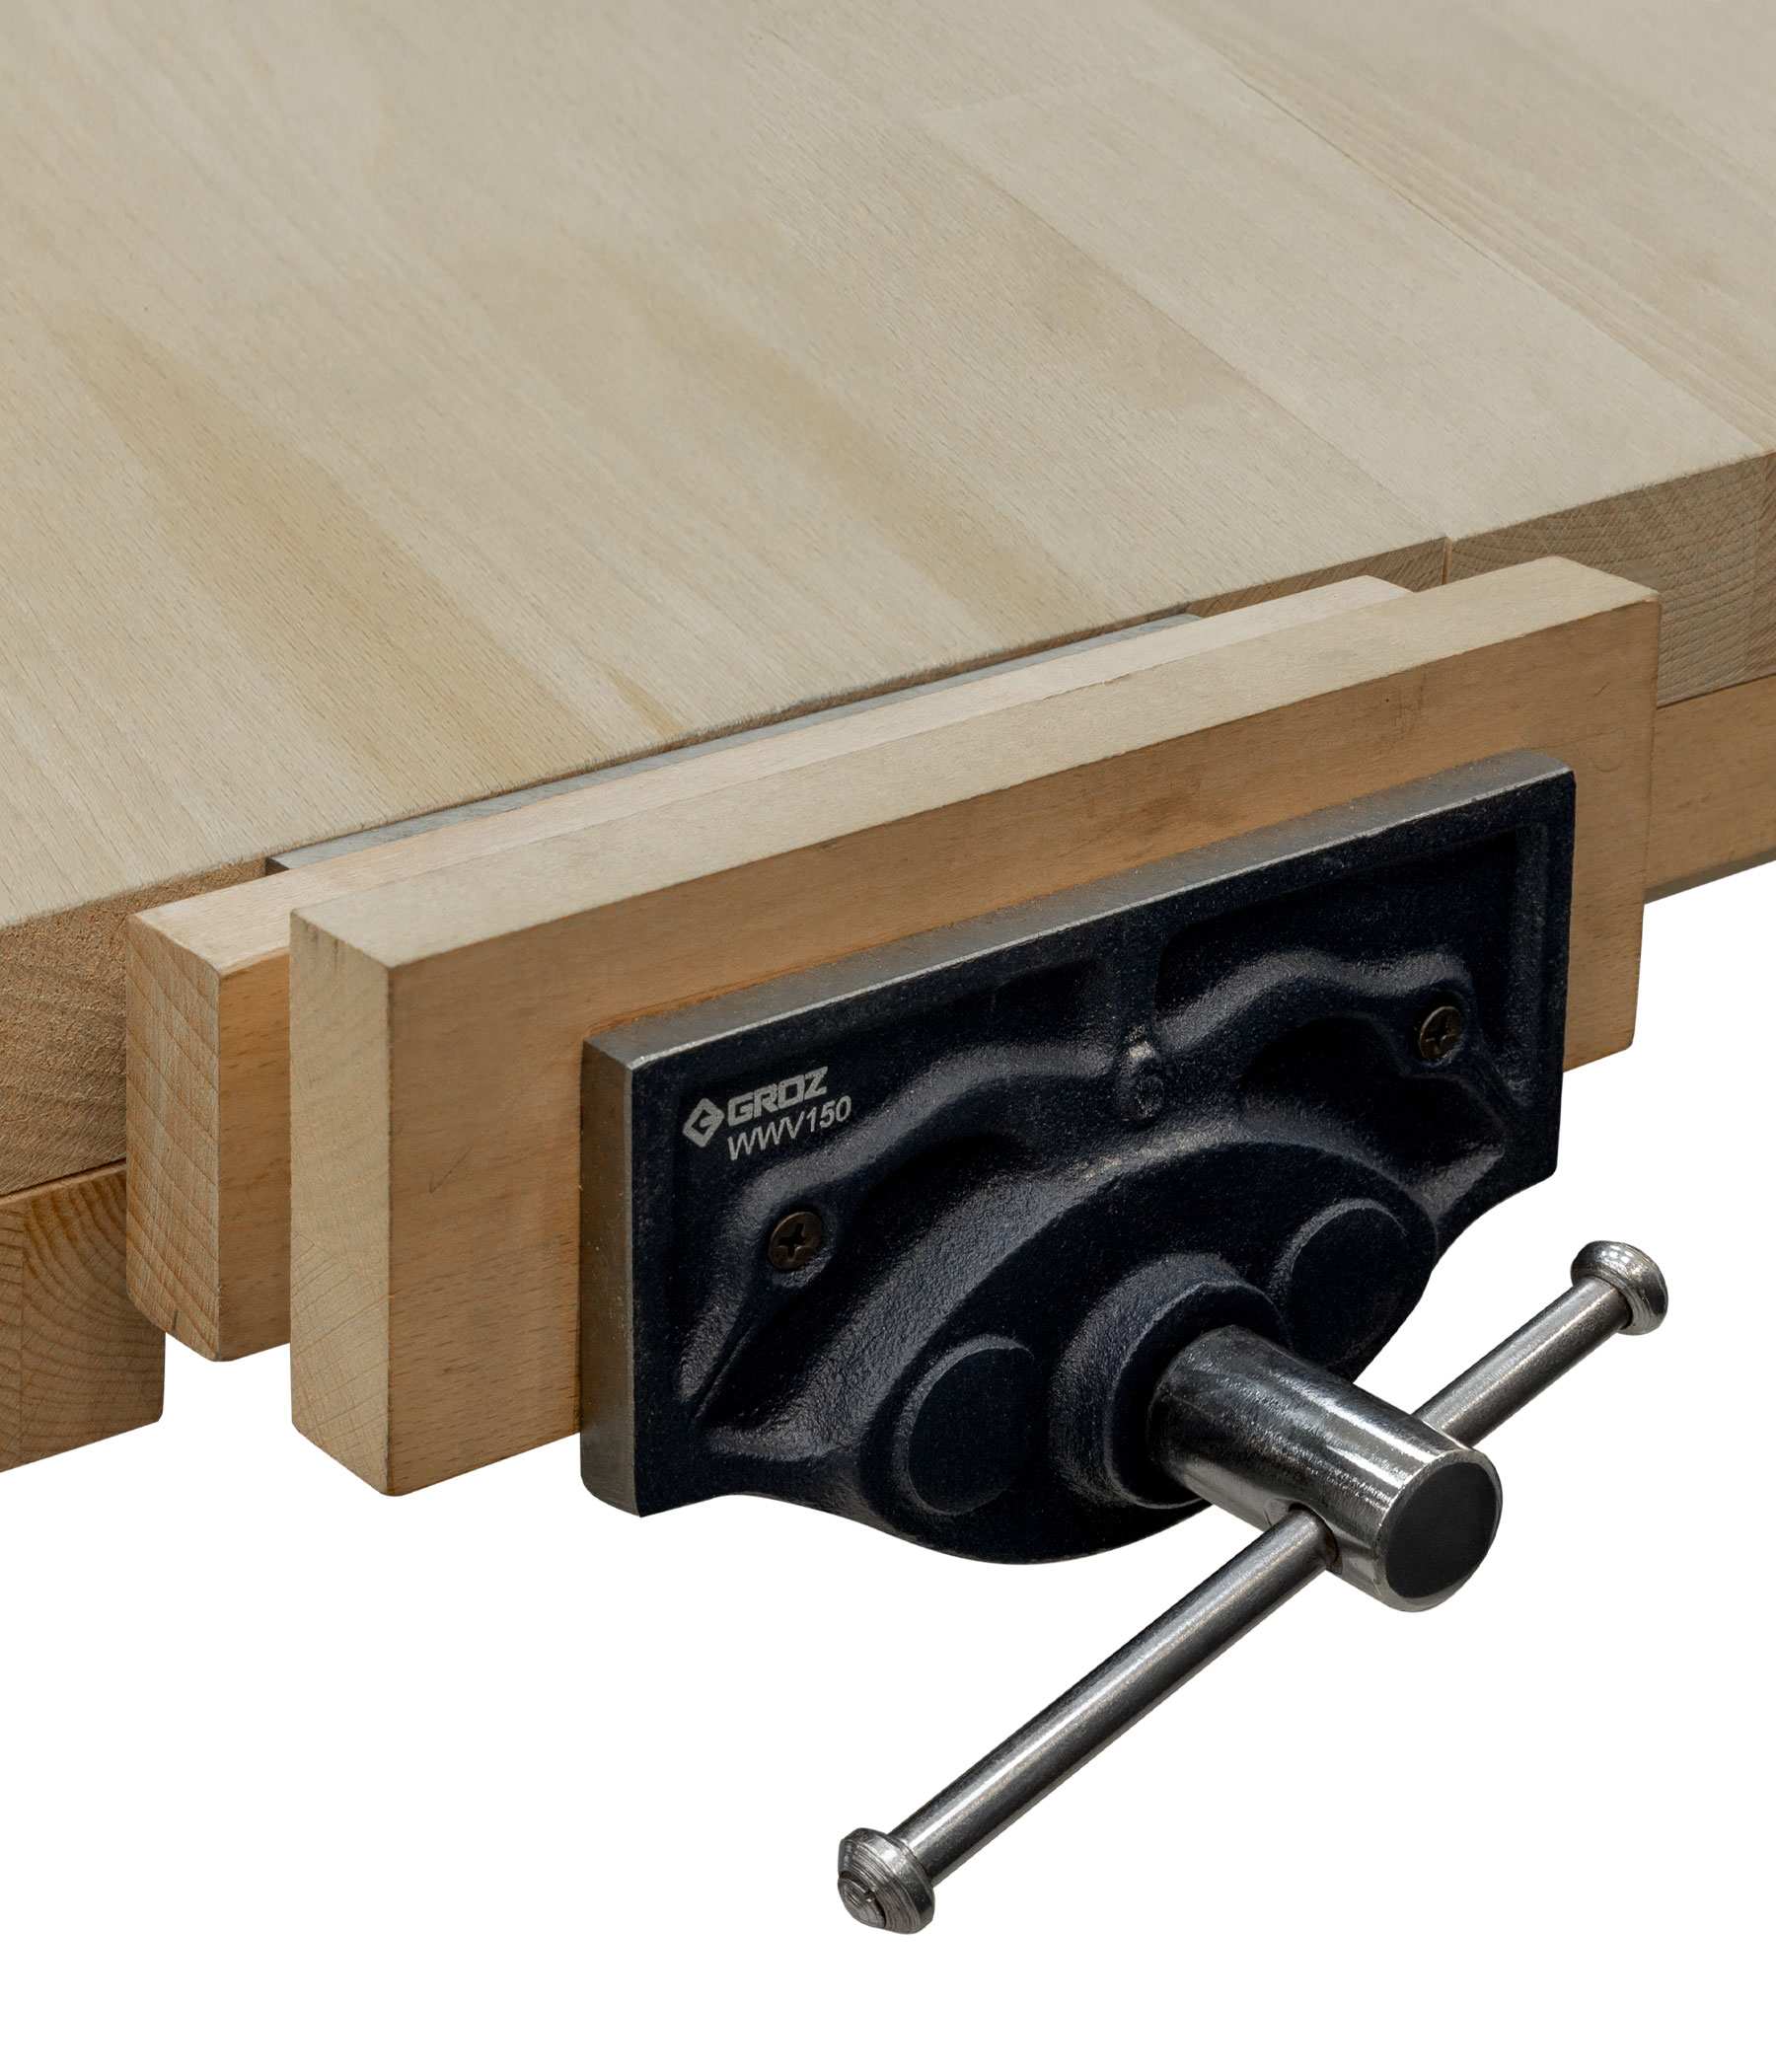 Joiner workbench VS 21 FV/SV with front and side vice pack